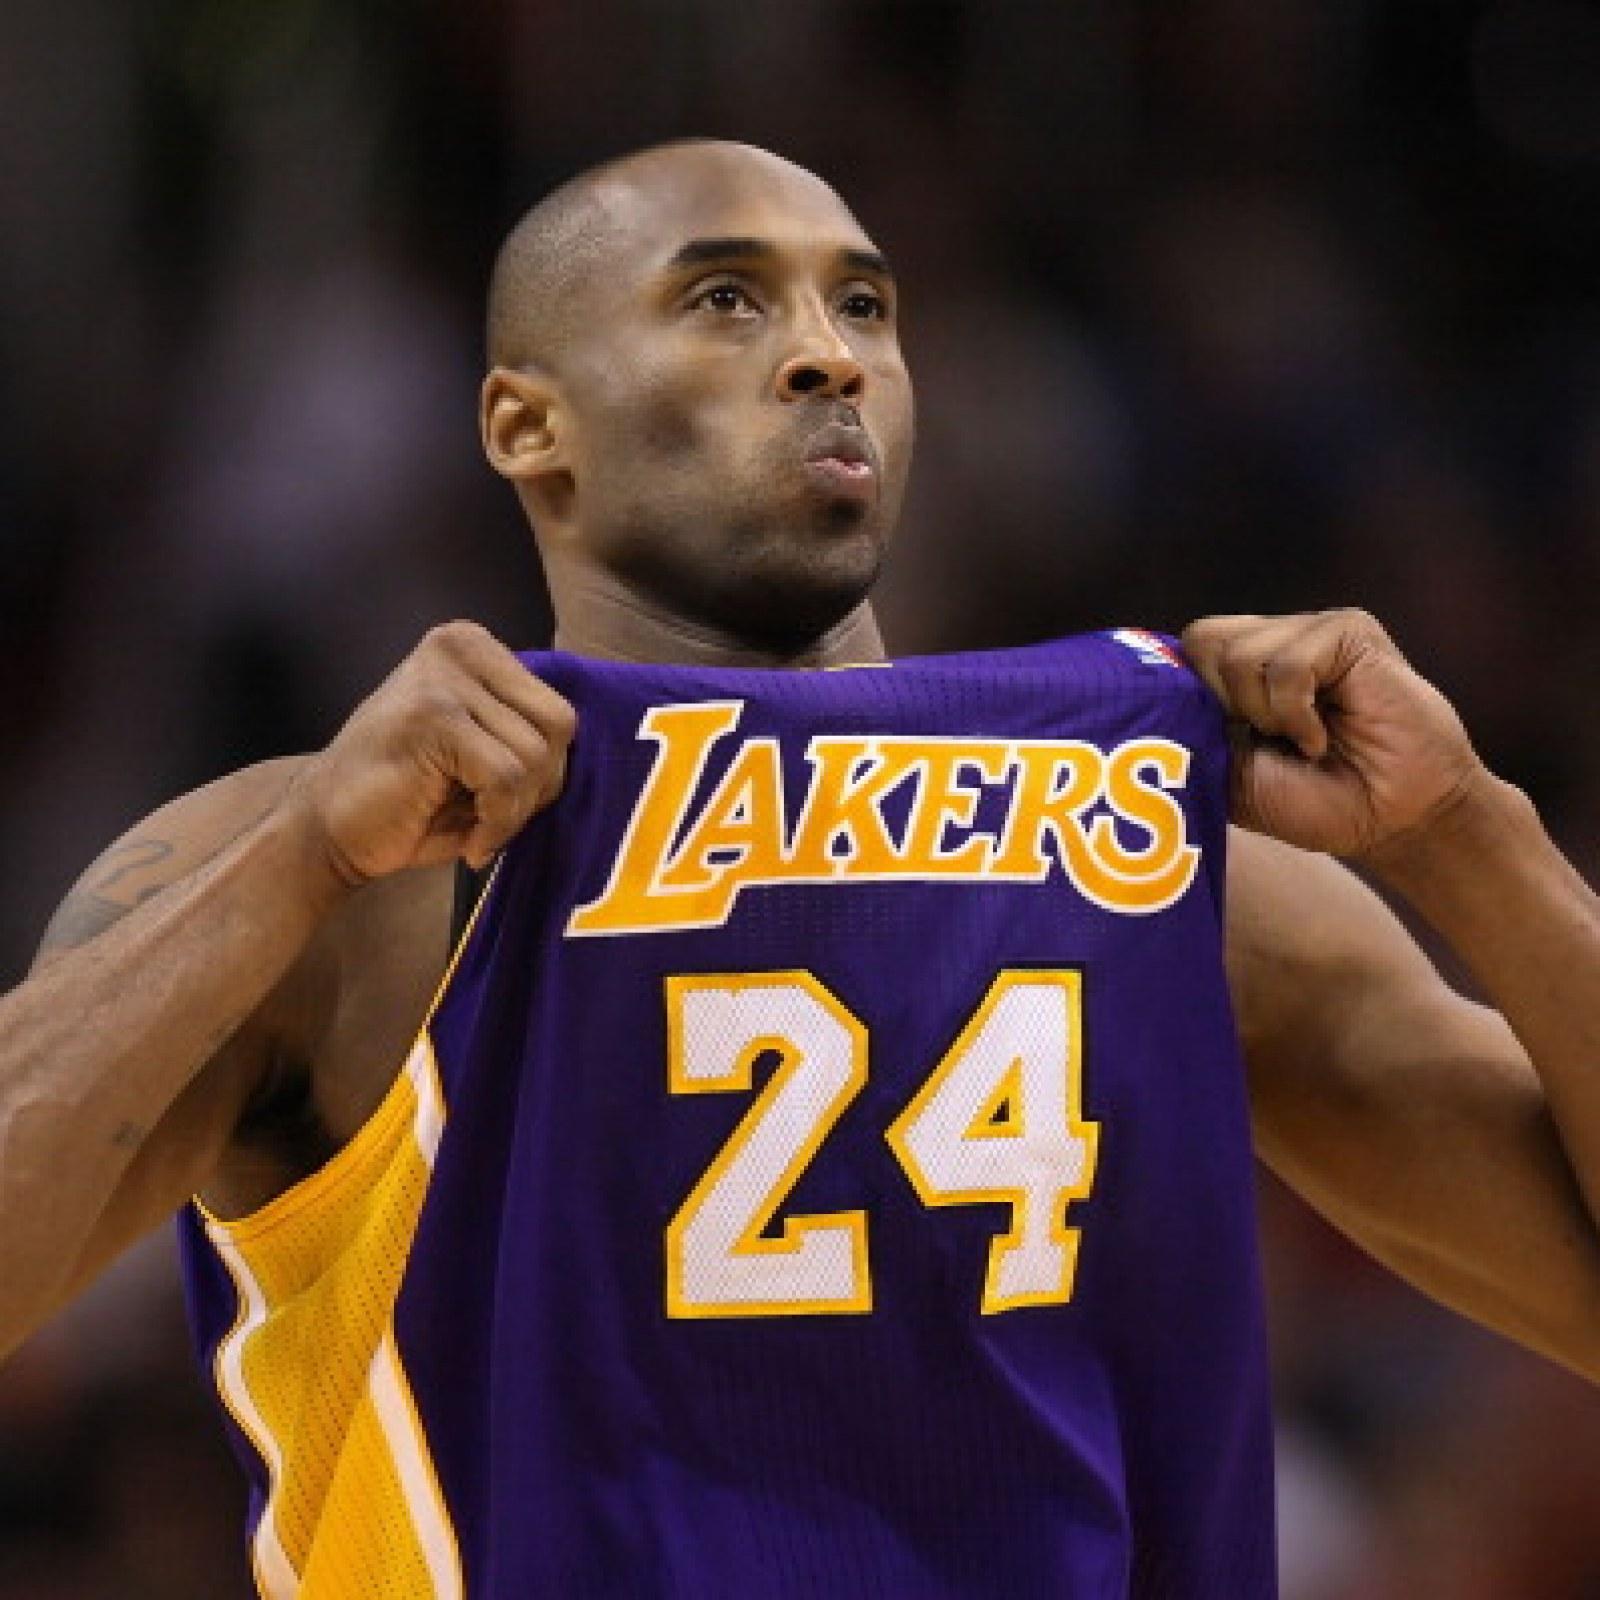 Memorable Kobe Bryant Quotes and Mamba's Unforgettable